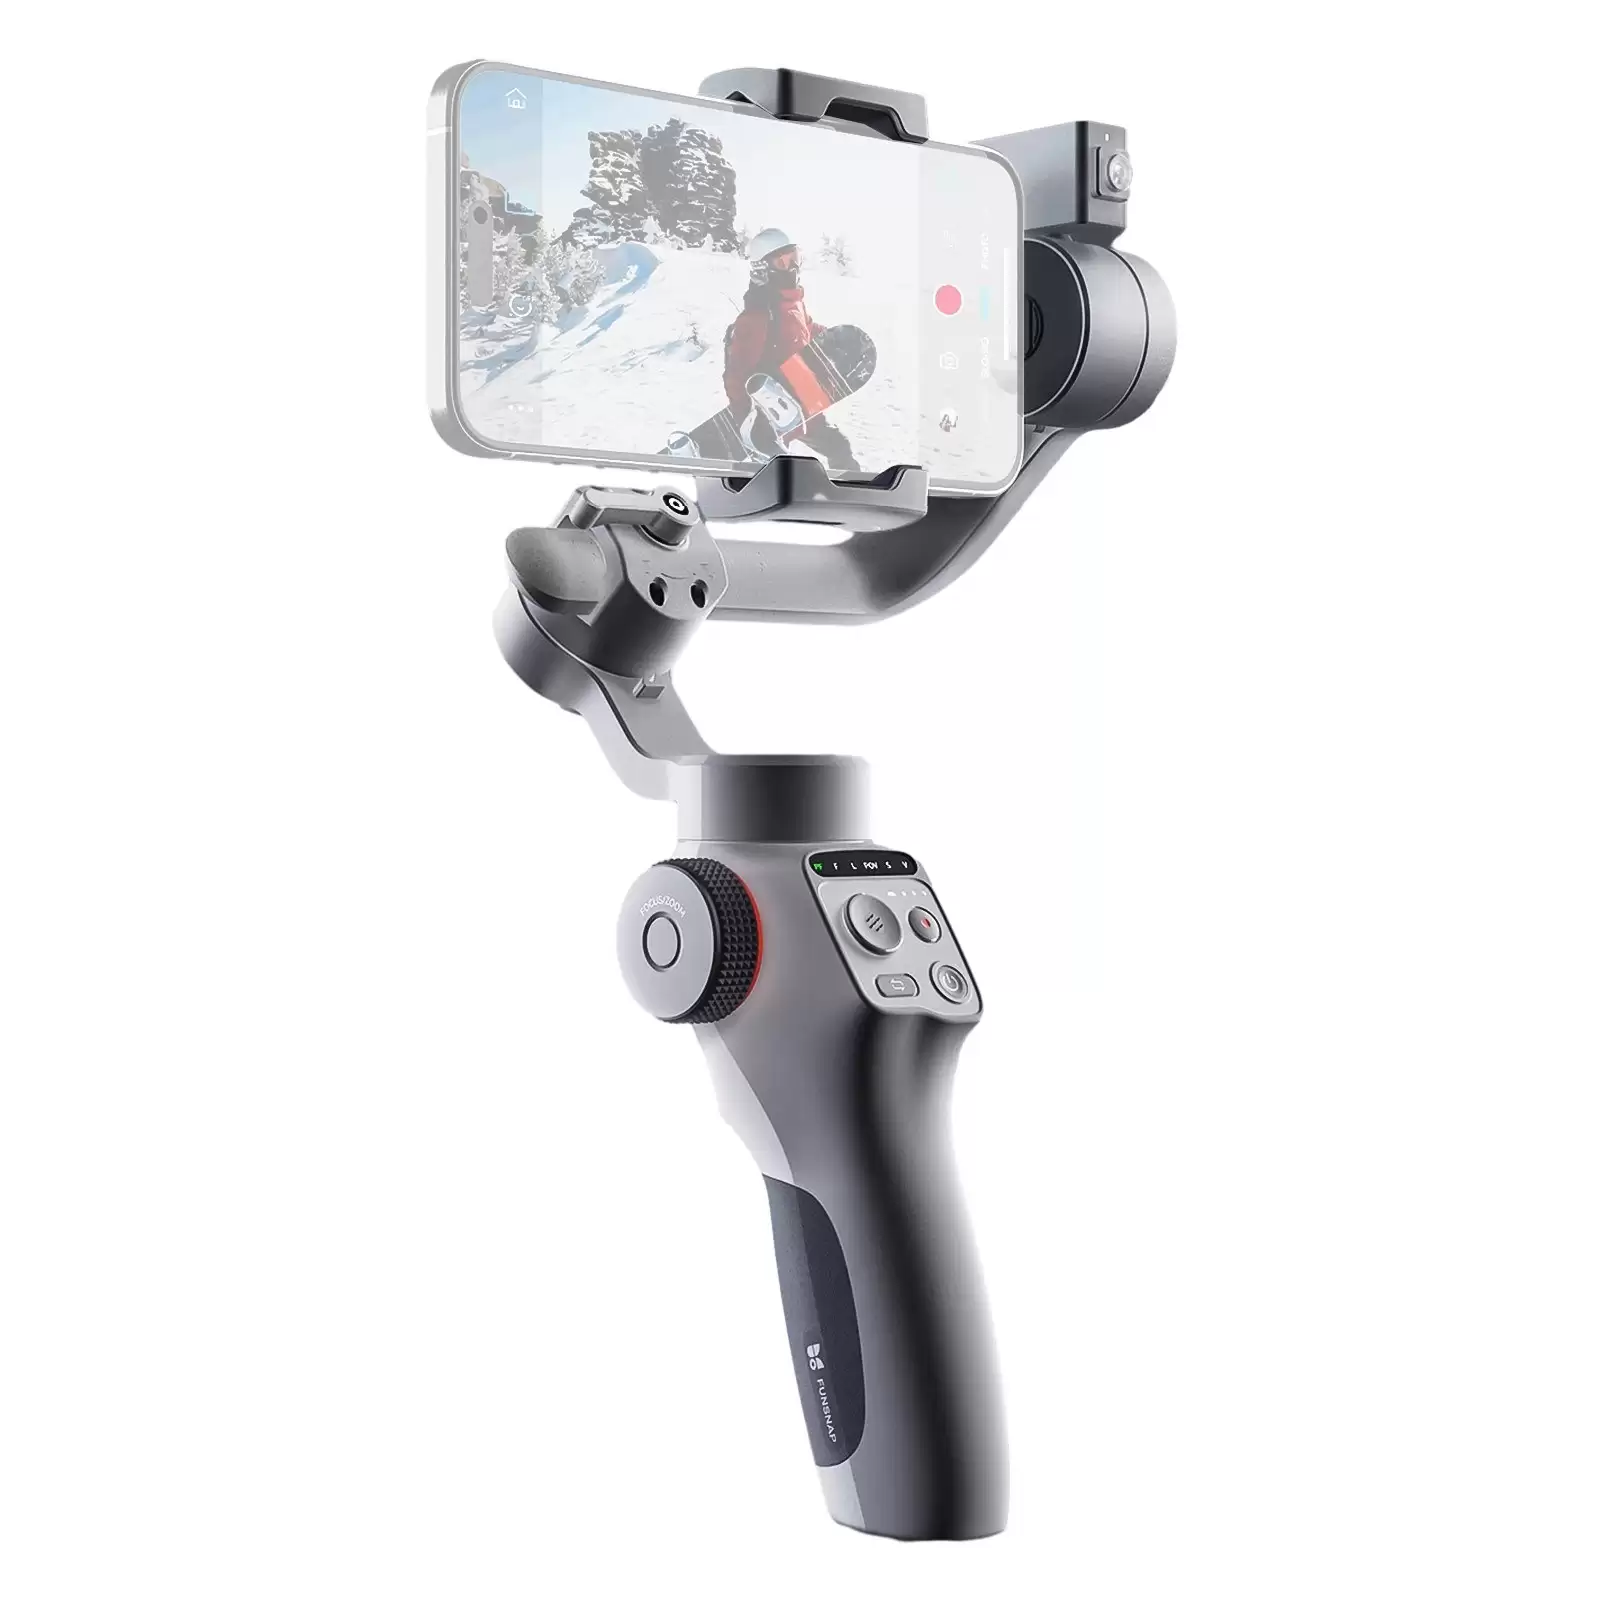 Order In Just $149 Funsnap Capture 5 3-axis Stabilizer Gimbal With This Discount Coupon At Tomtop